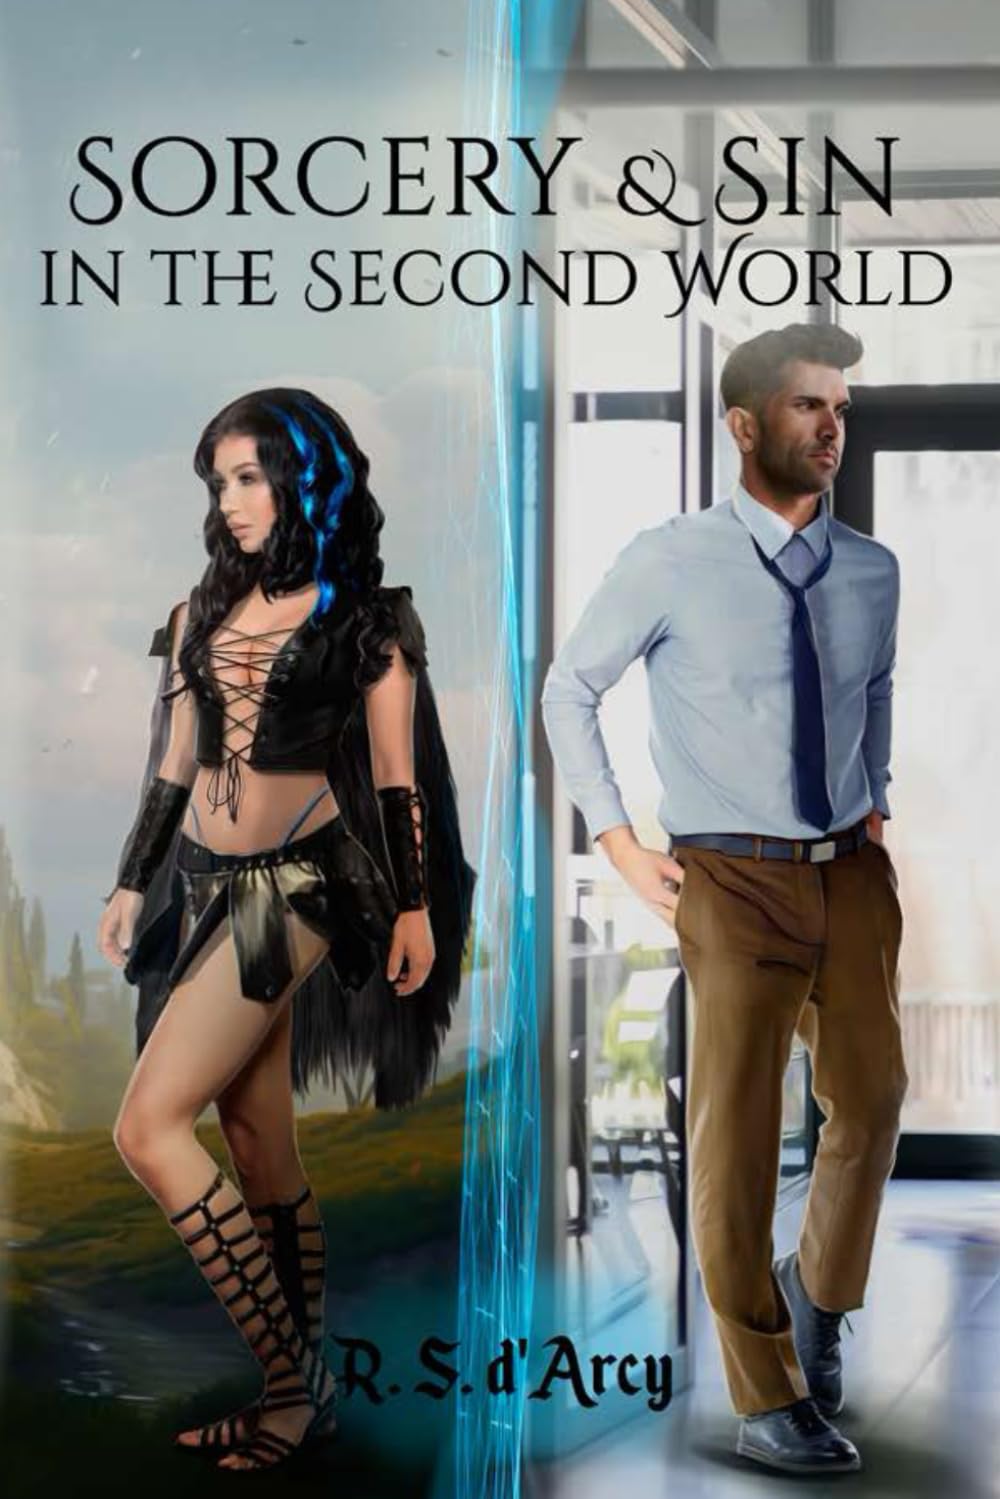 R. S. d'Arcy Releases New Fantasy Novel - Sorcery & Sin in the Second World